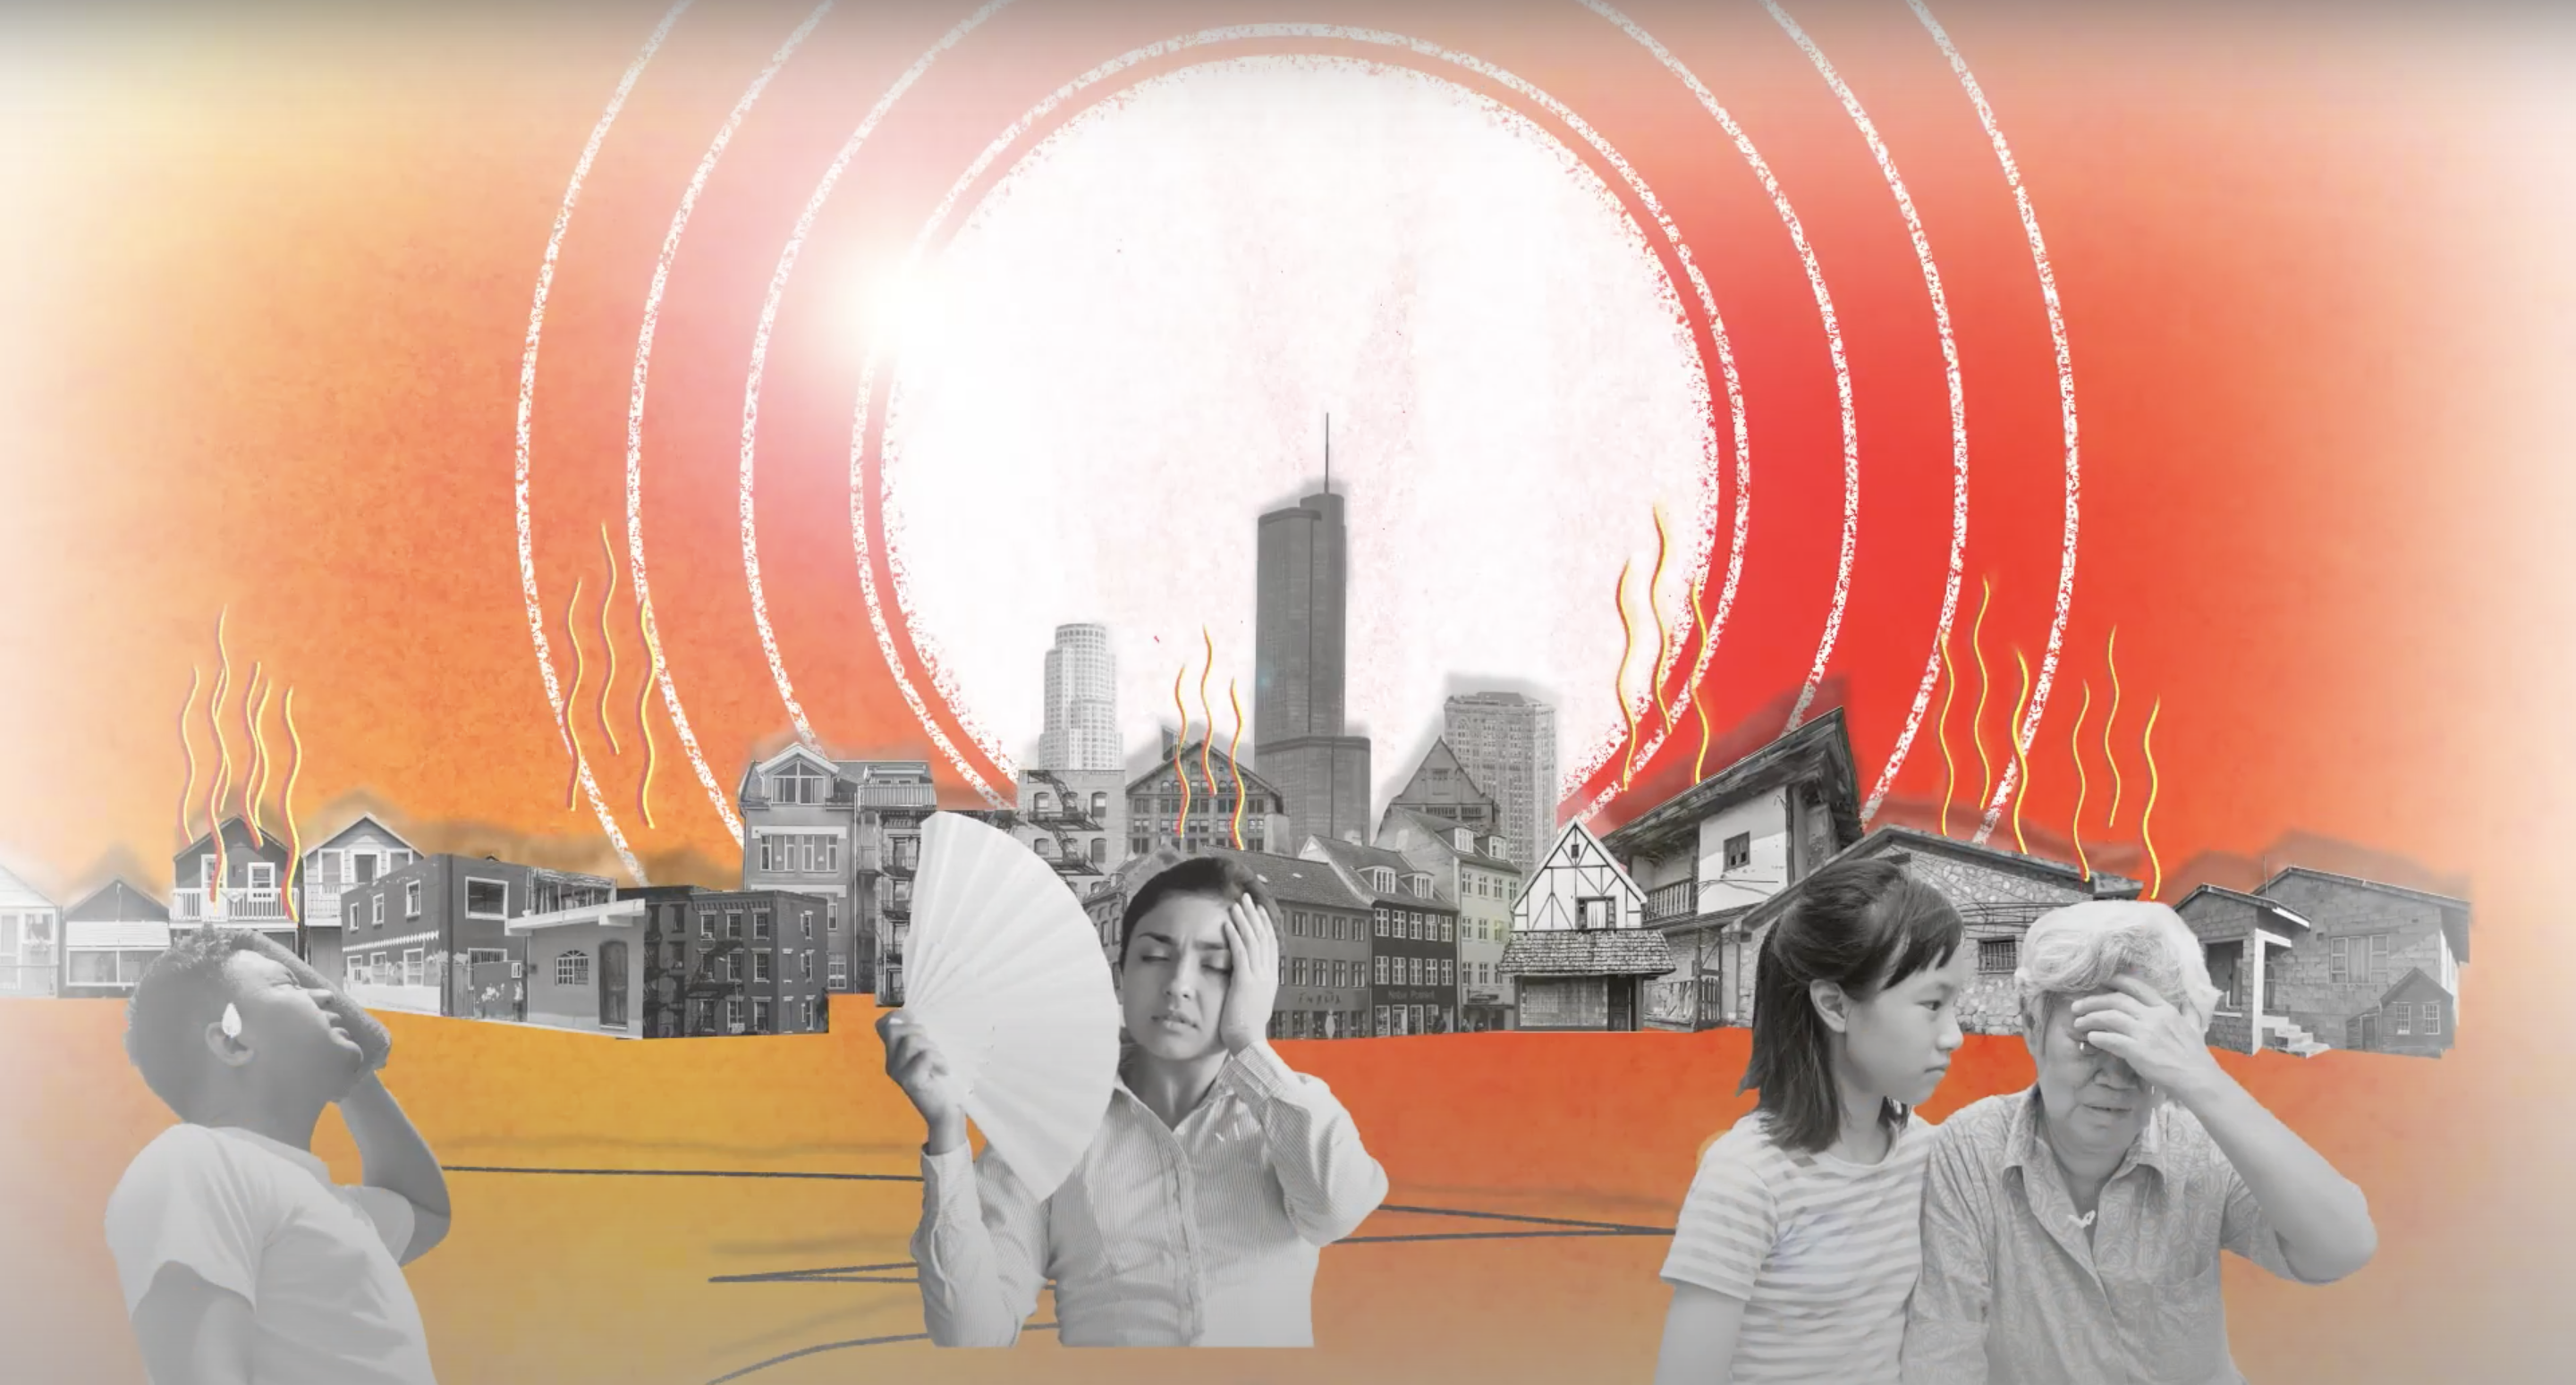 Graphic of people standing in front of a city with a blazing red sun behind them. They are sweating, using fans, and a girl is holding a crying older woman.